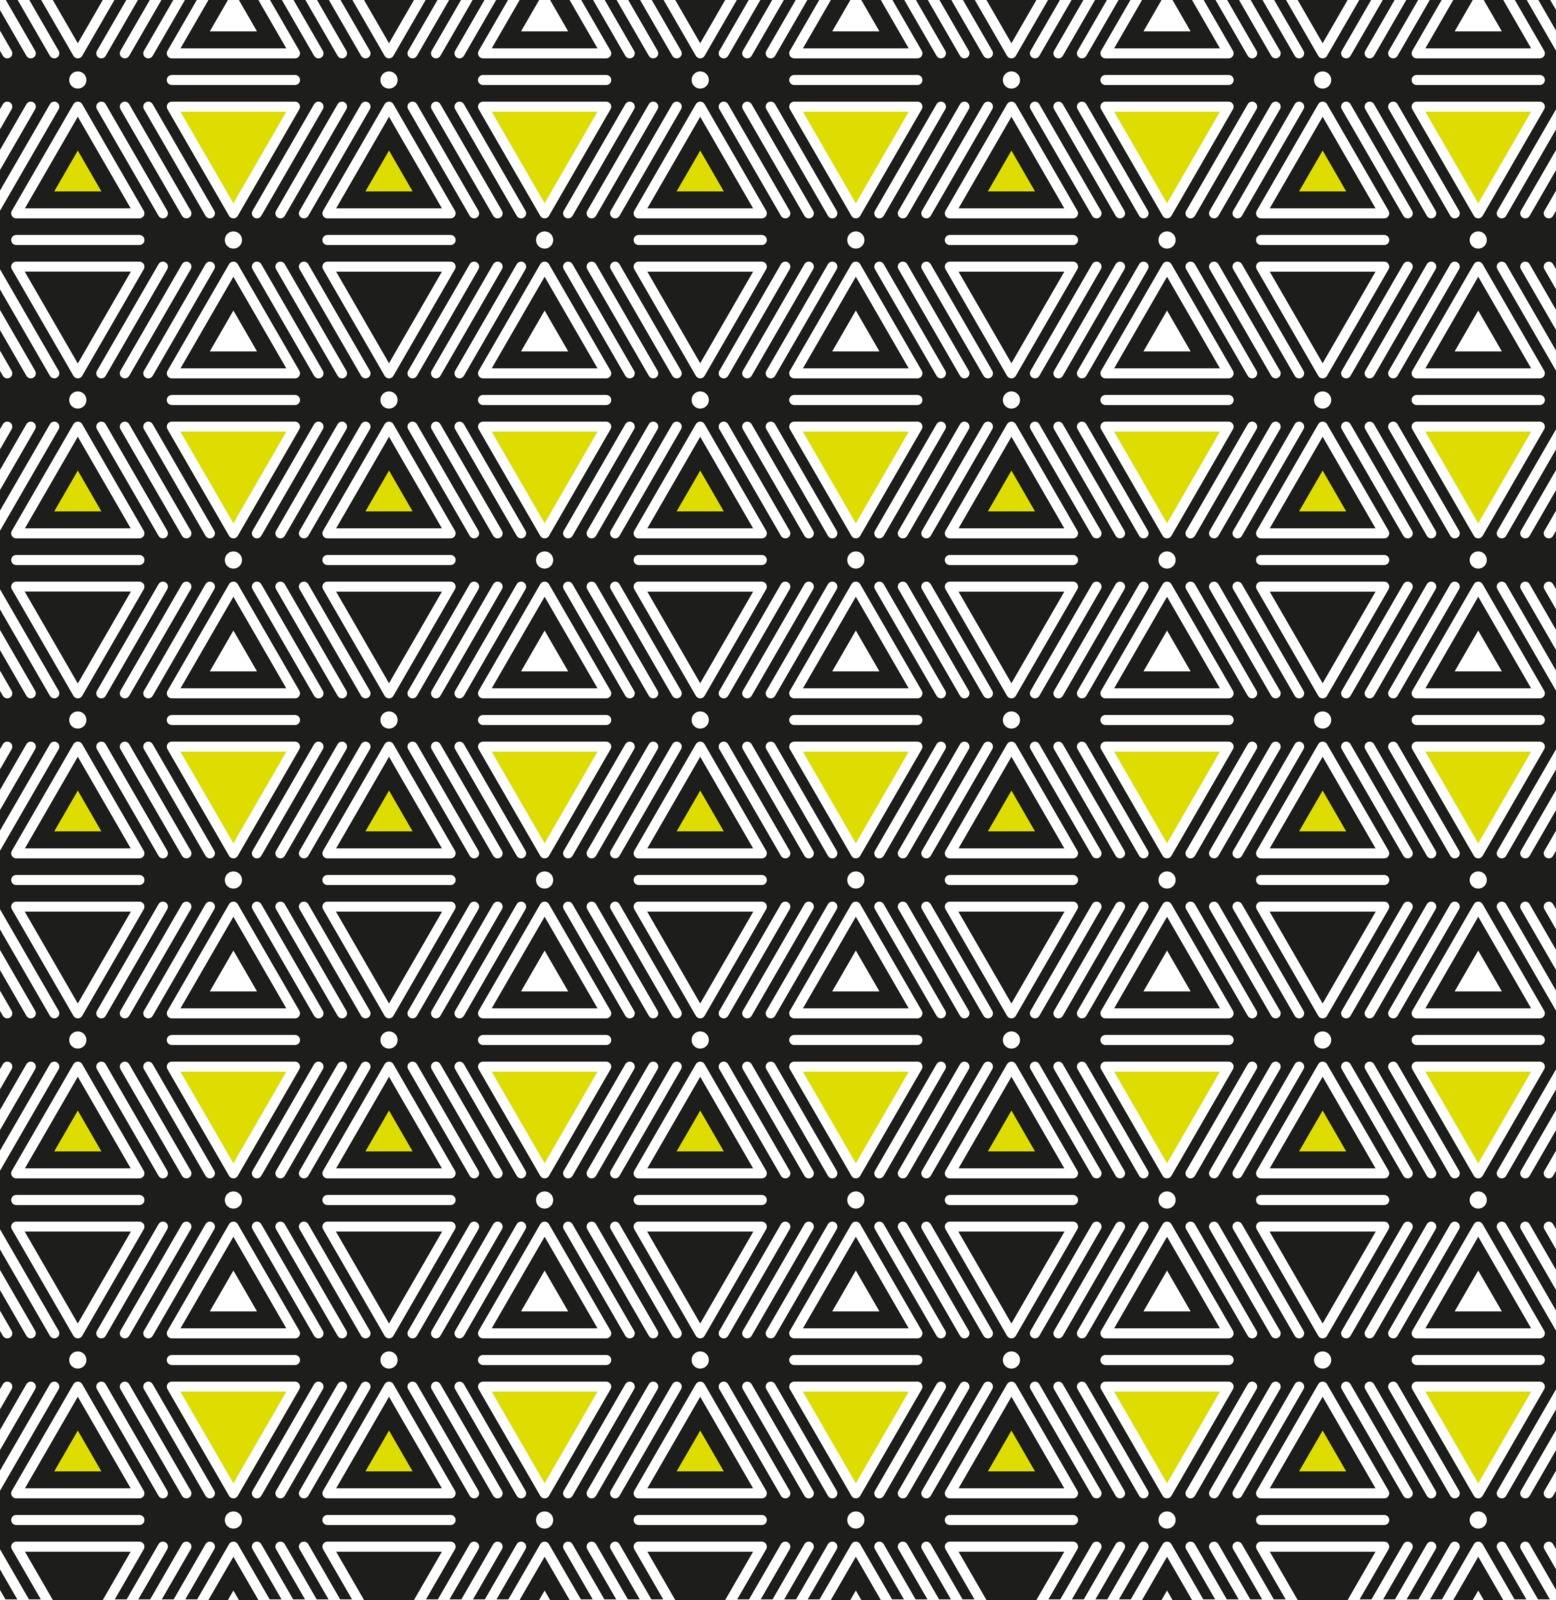 American ethnic indigenous Seamless art triangles pattern by infinityyy